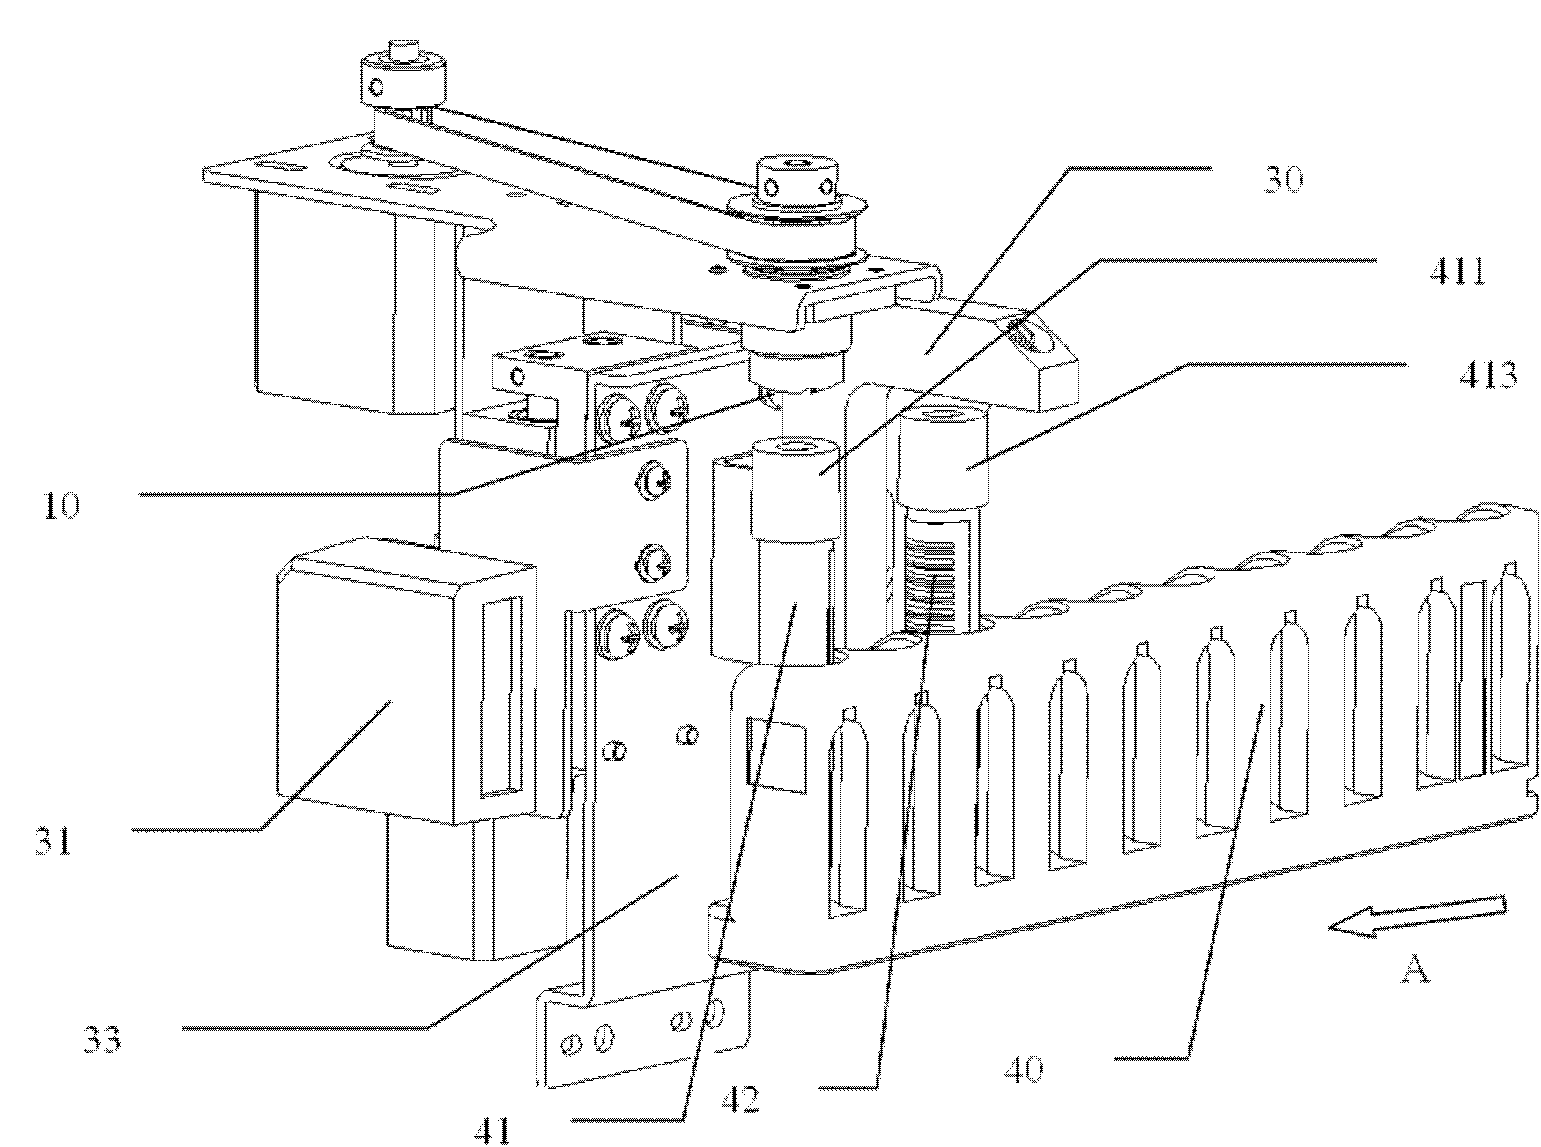 Bar code scanning device and blood cell analyzer thereof